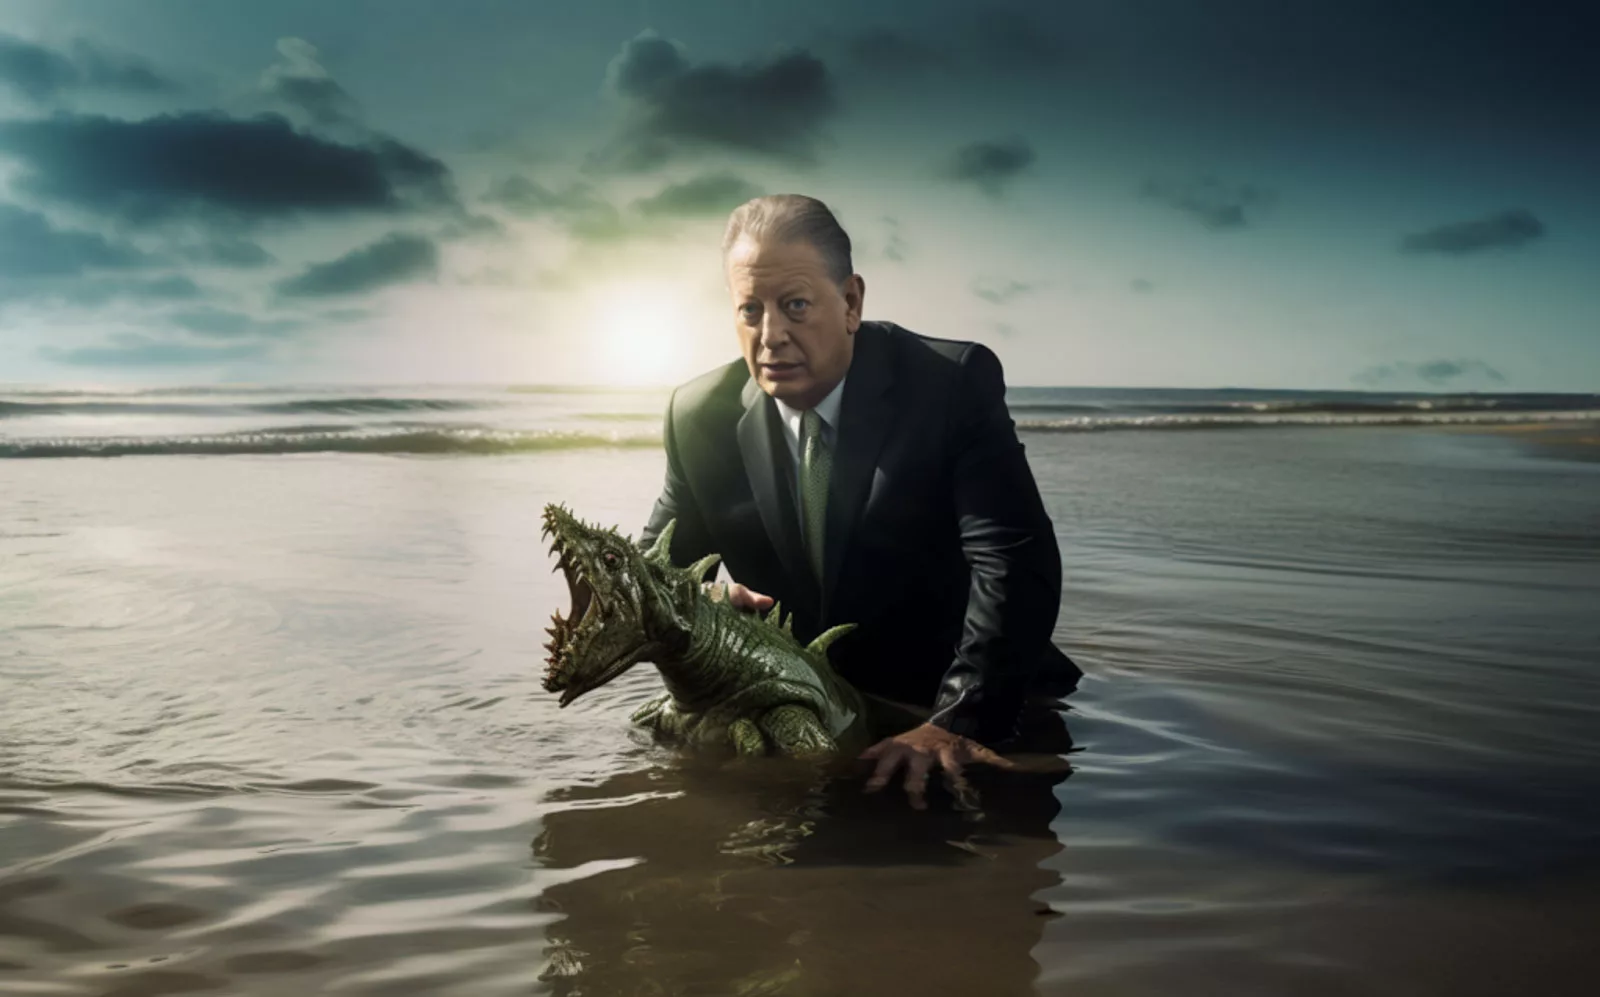 Man in business suit holding a creature from the water